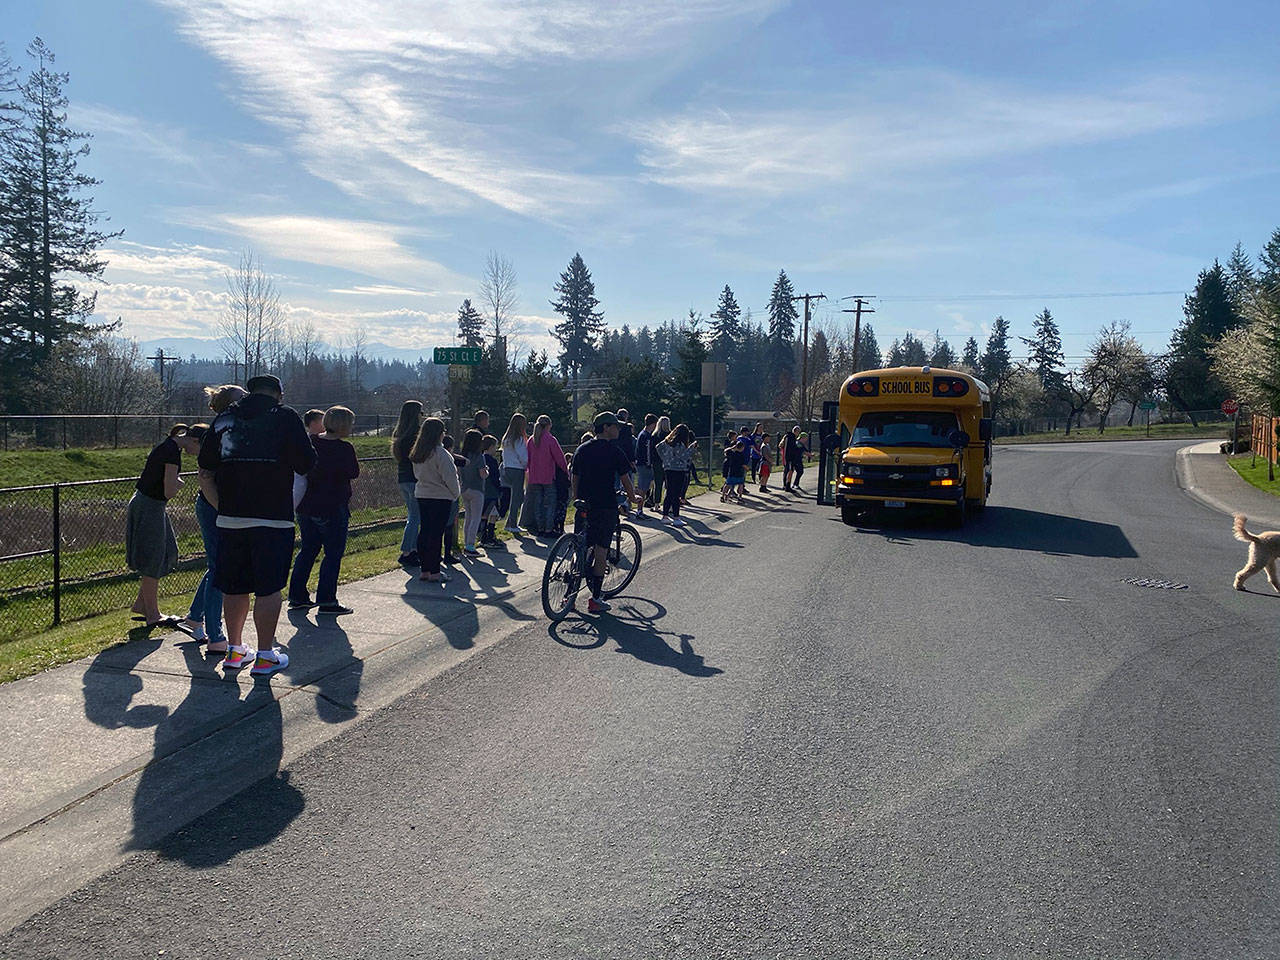 A handful of White River School District families lined up in front of a school bus to pick up sack breakfasts and lunches for their children back in March, when the pandemic began. Photo courtesy White River School District